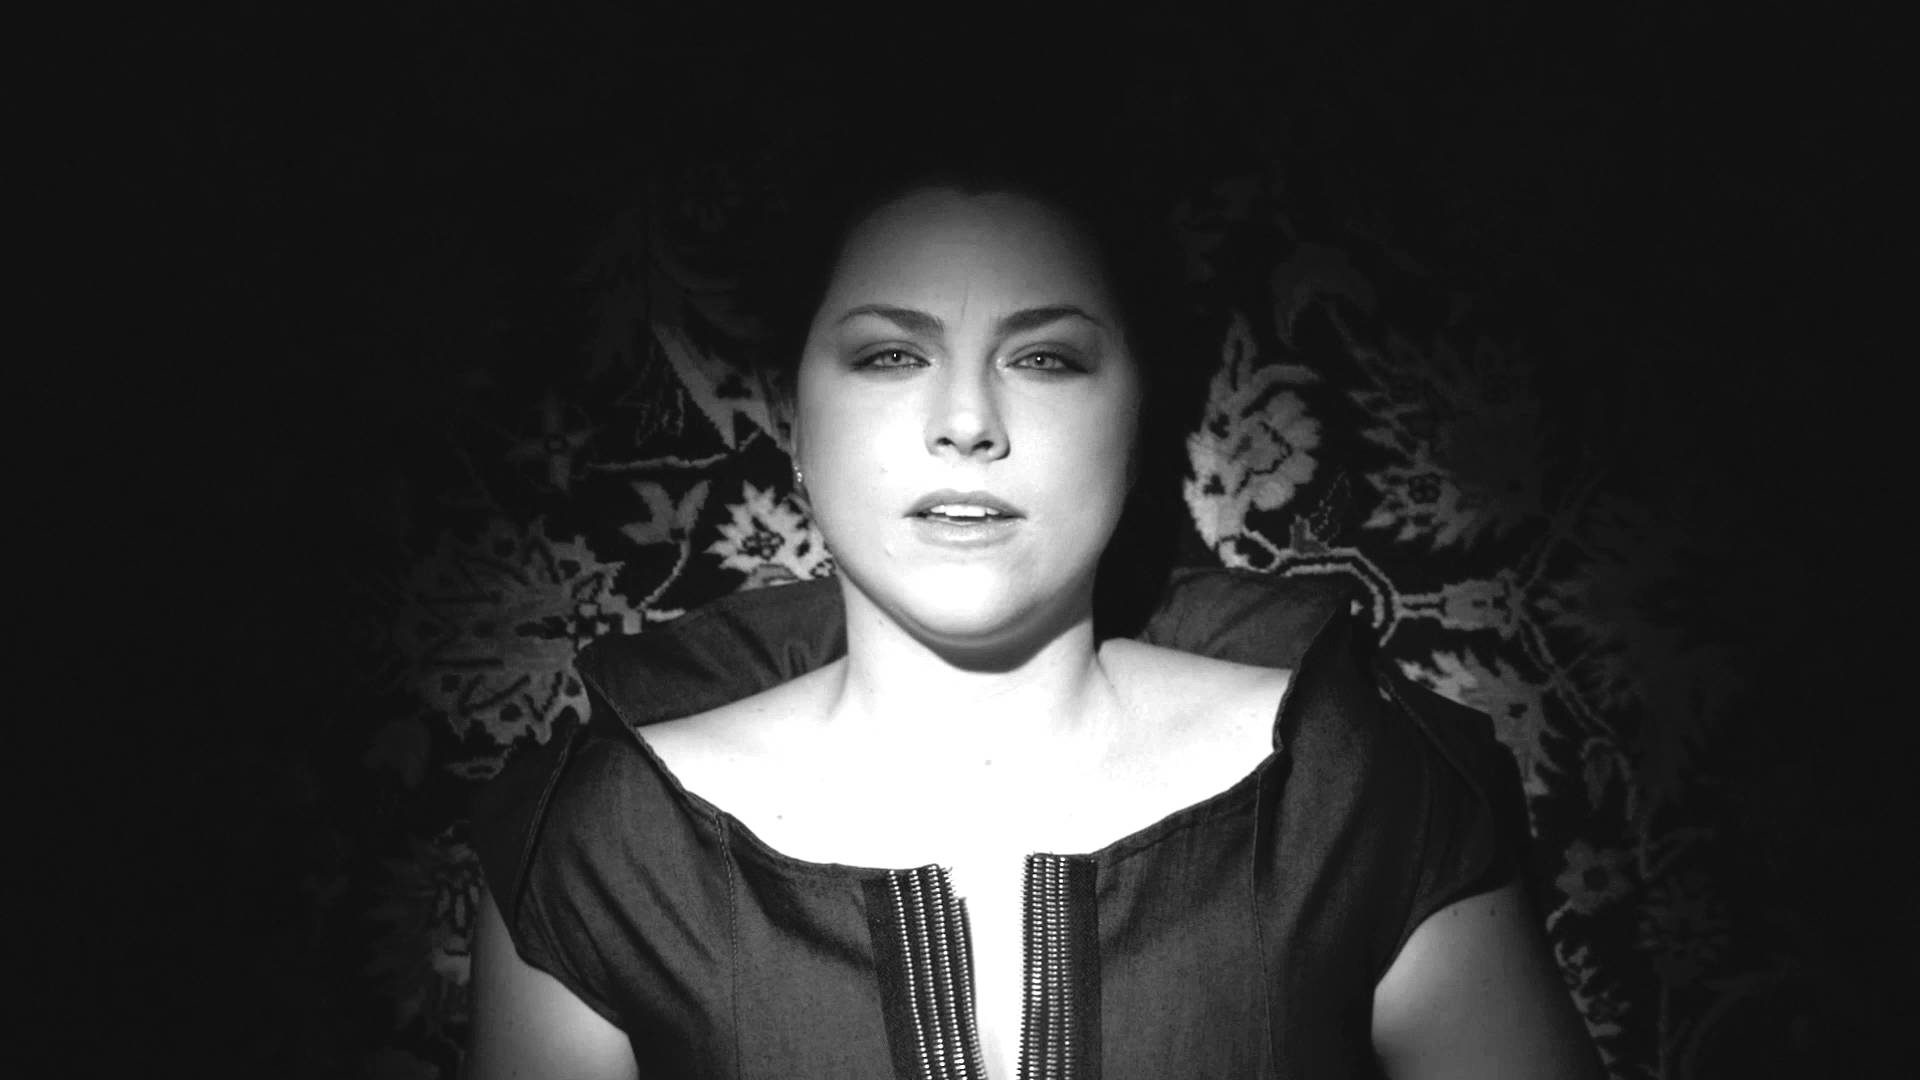 WATCH: Amy Lee Covers Chris Isaak's "Baby Did A Bad, Bad Thing" - Music